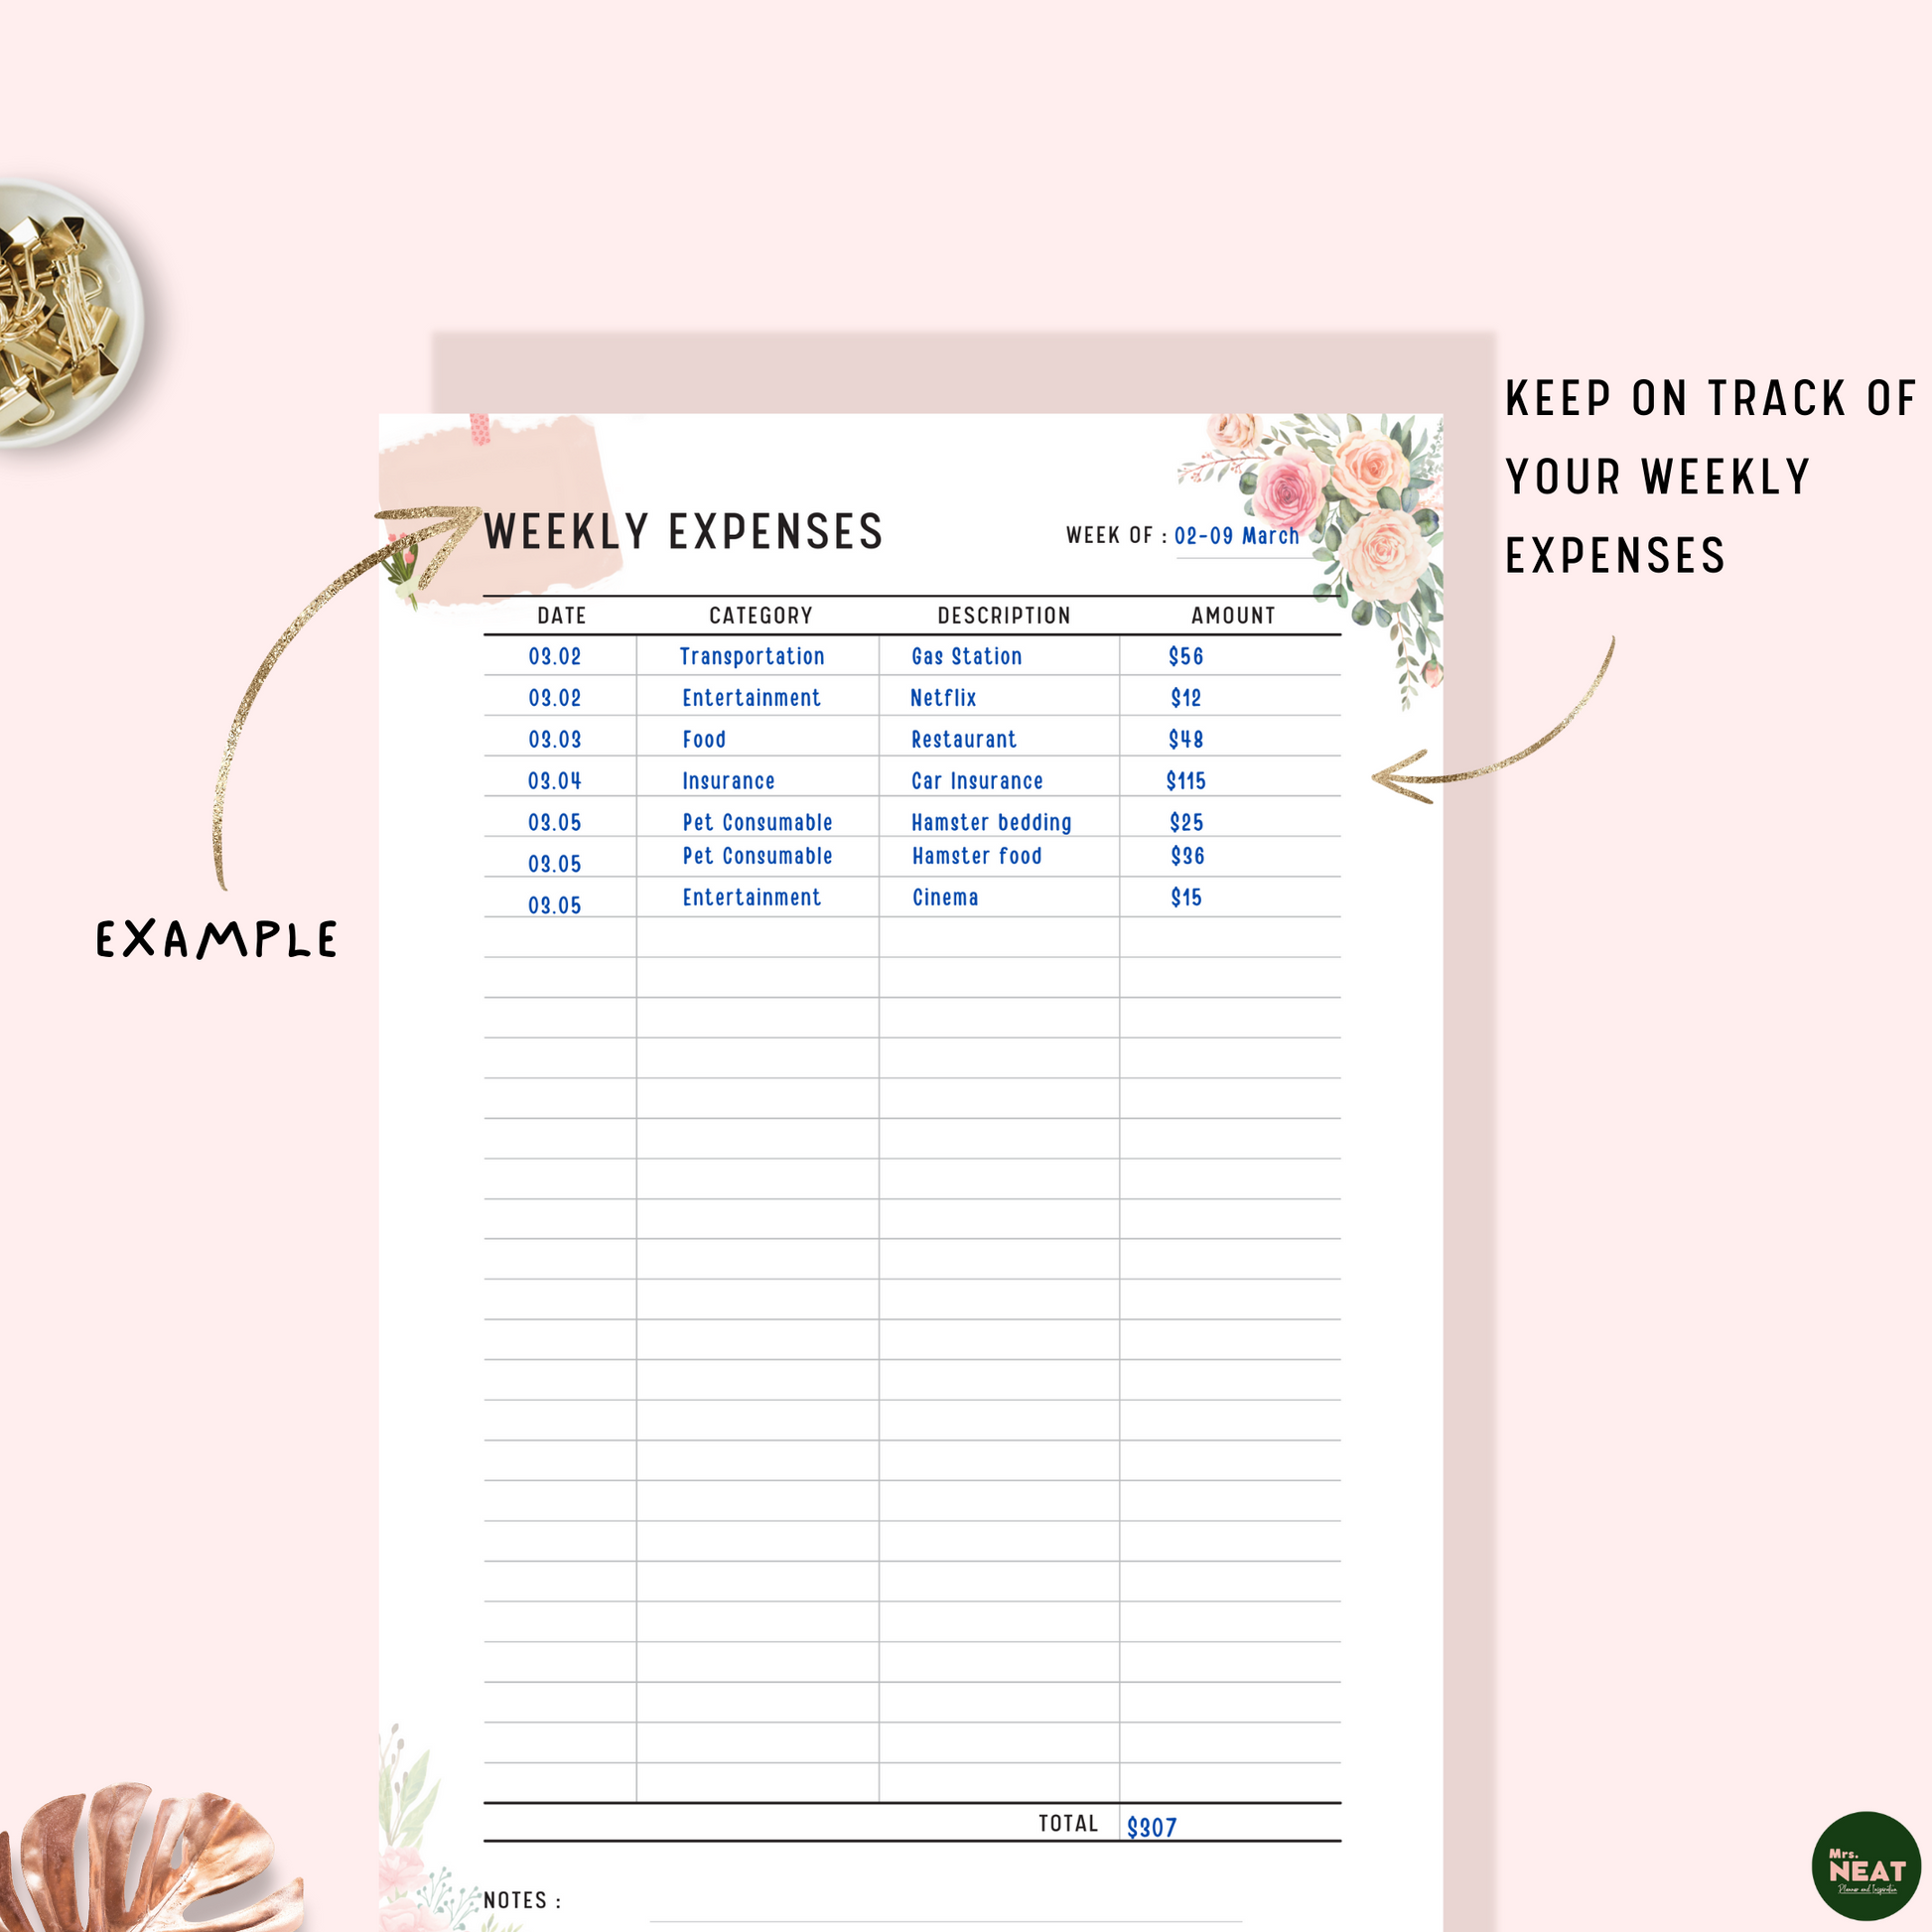 Floral Weekly Expenses Tracker Planner Printable with detail list expenses for 02 - 09 March